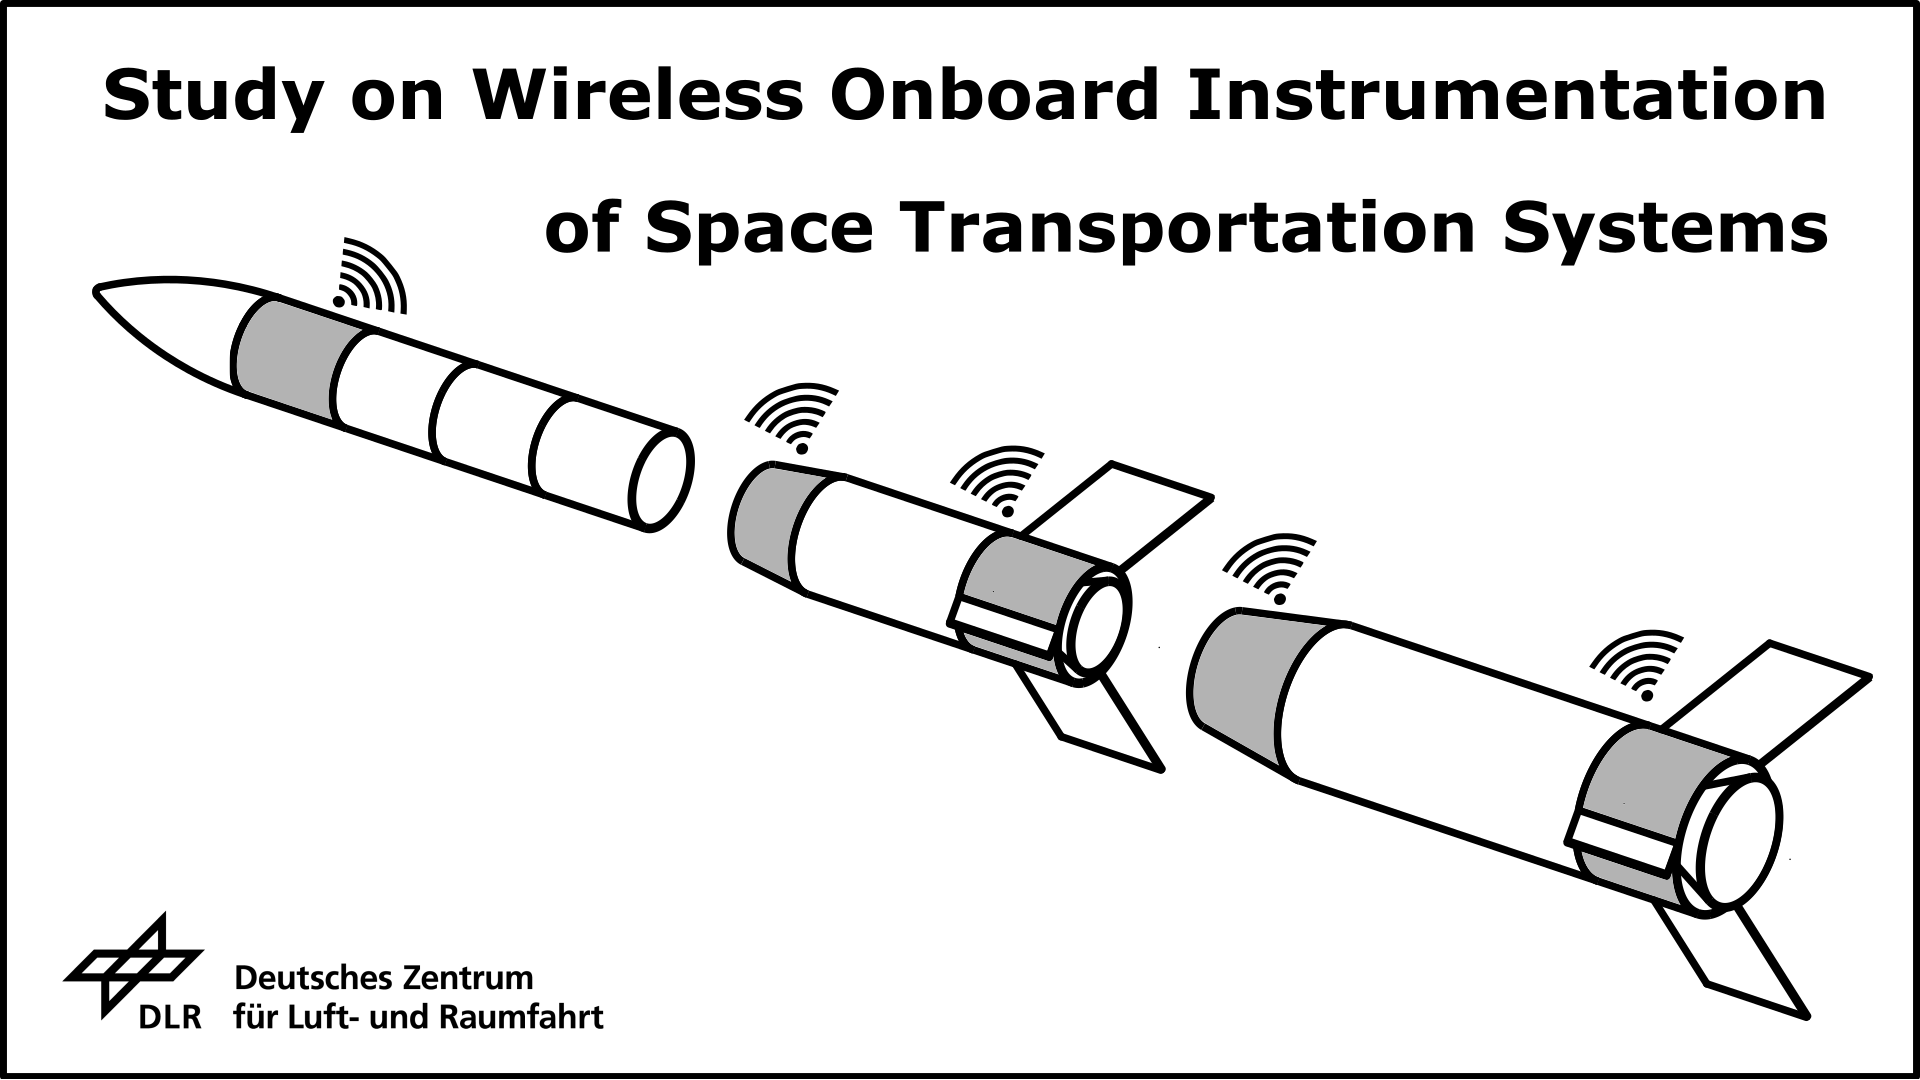 Study on Wireless Onboard Instrumentation of Space Transportation Systems - Open Channel Studies evaluation 2020-09